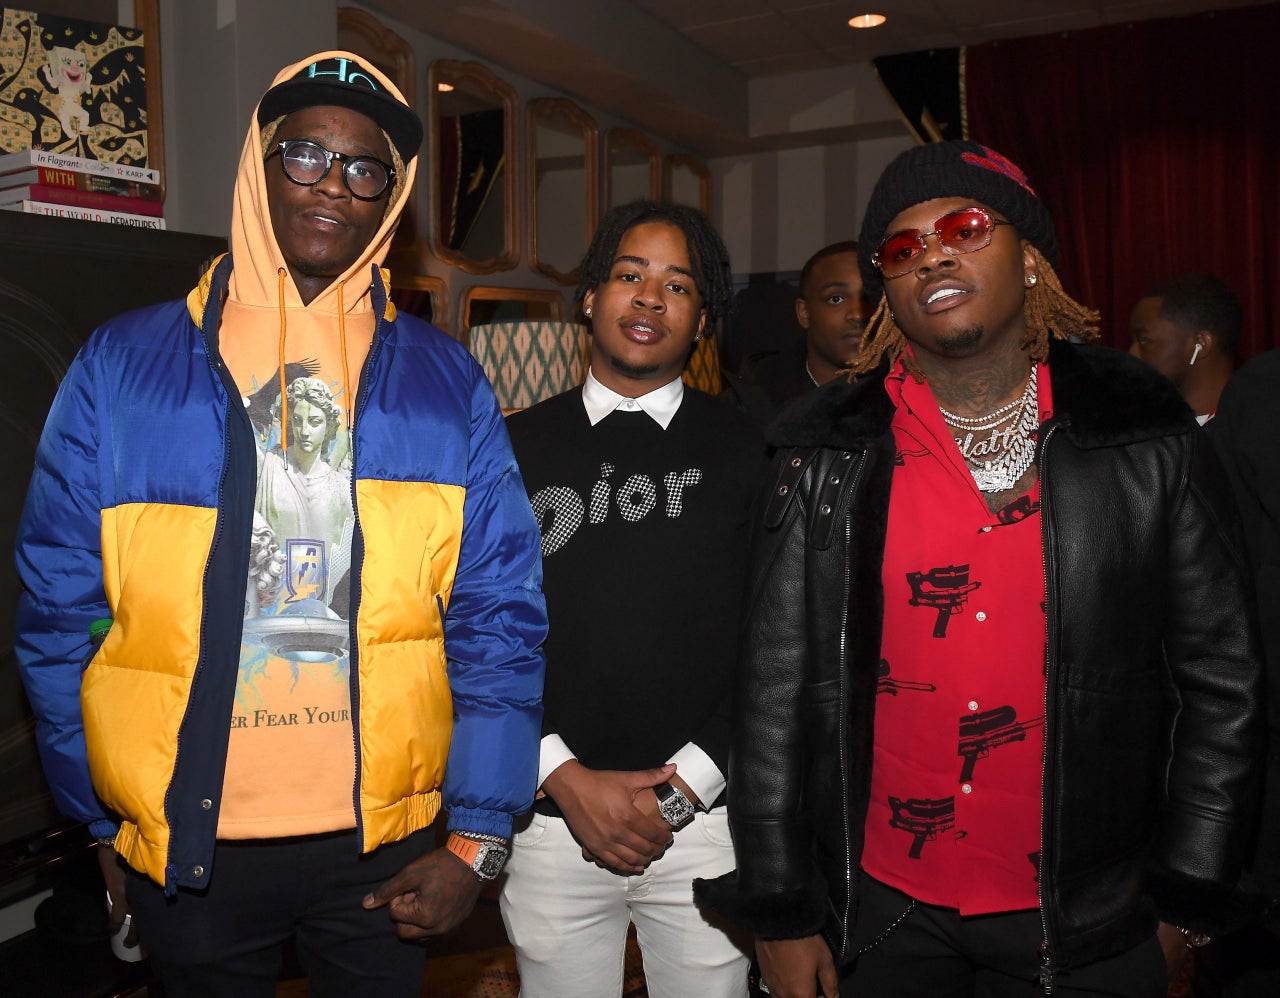 Rappers Young Thug and Gunna Post Bail for Low-Level Drug Offenders ...